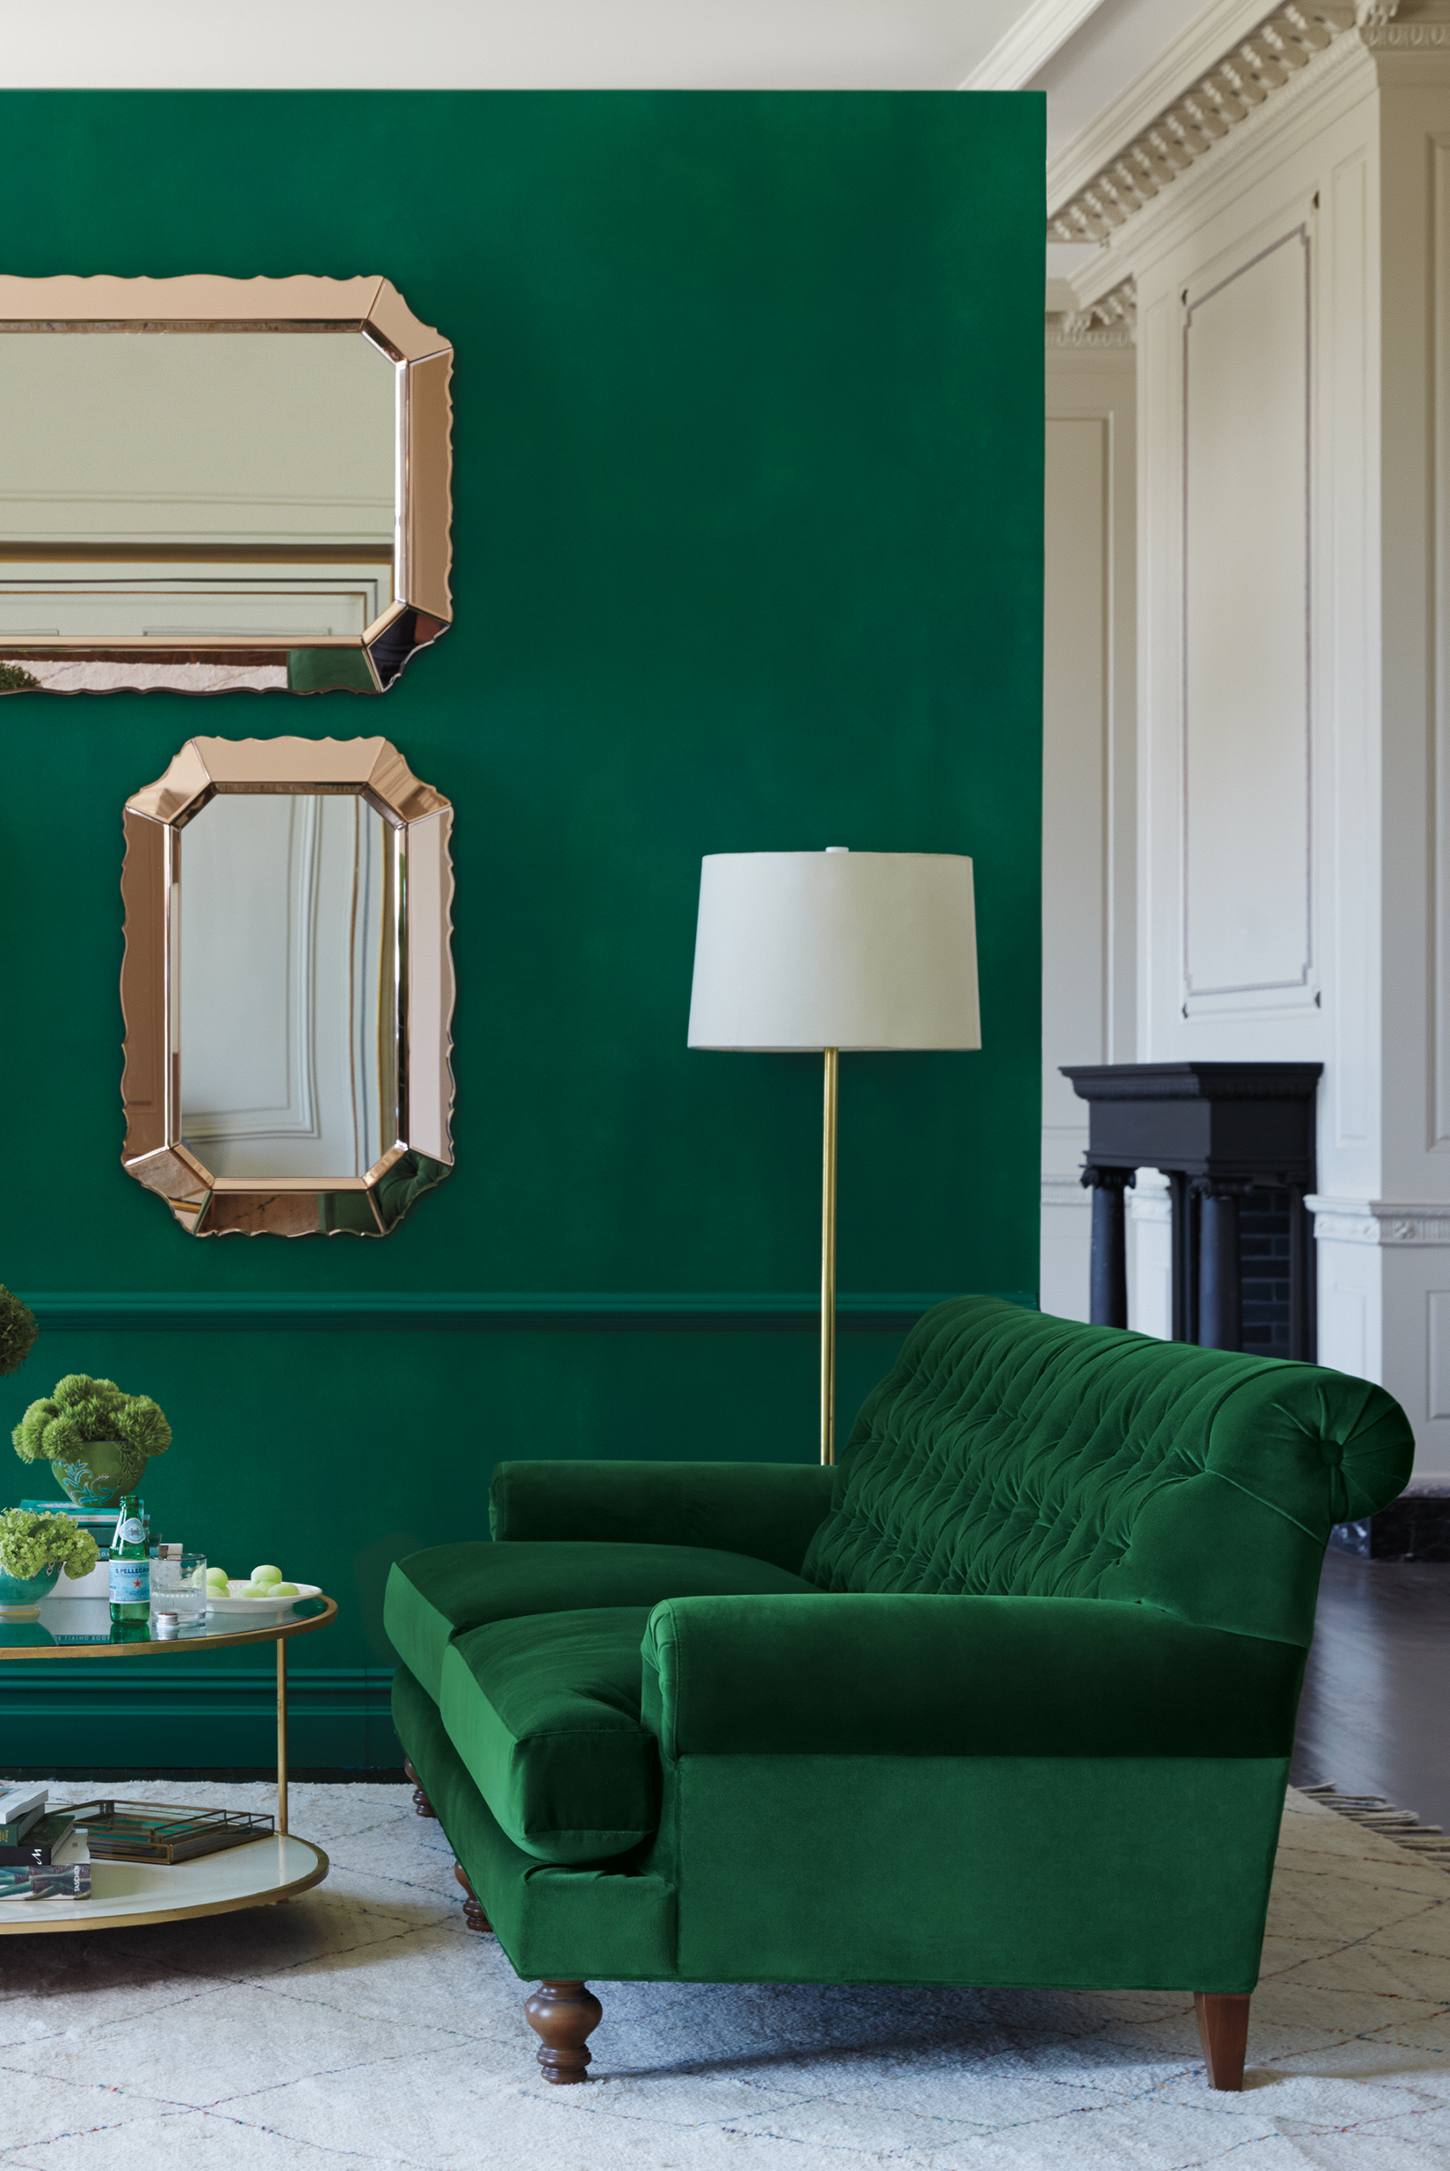 jewel tone interiors implement trend way right source